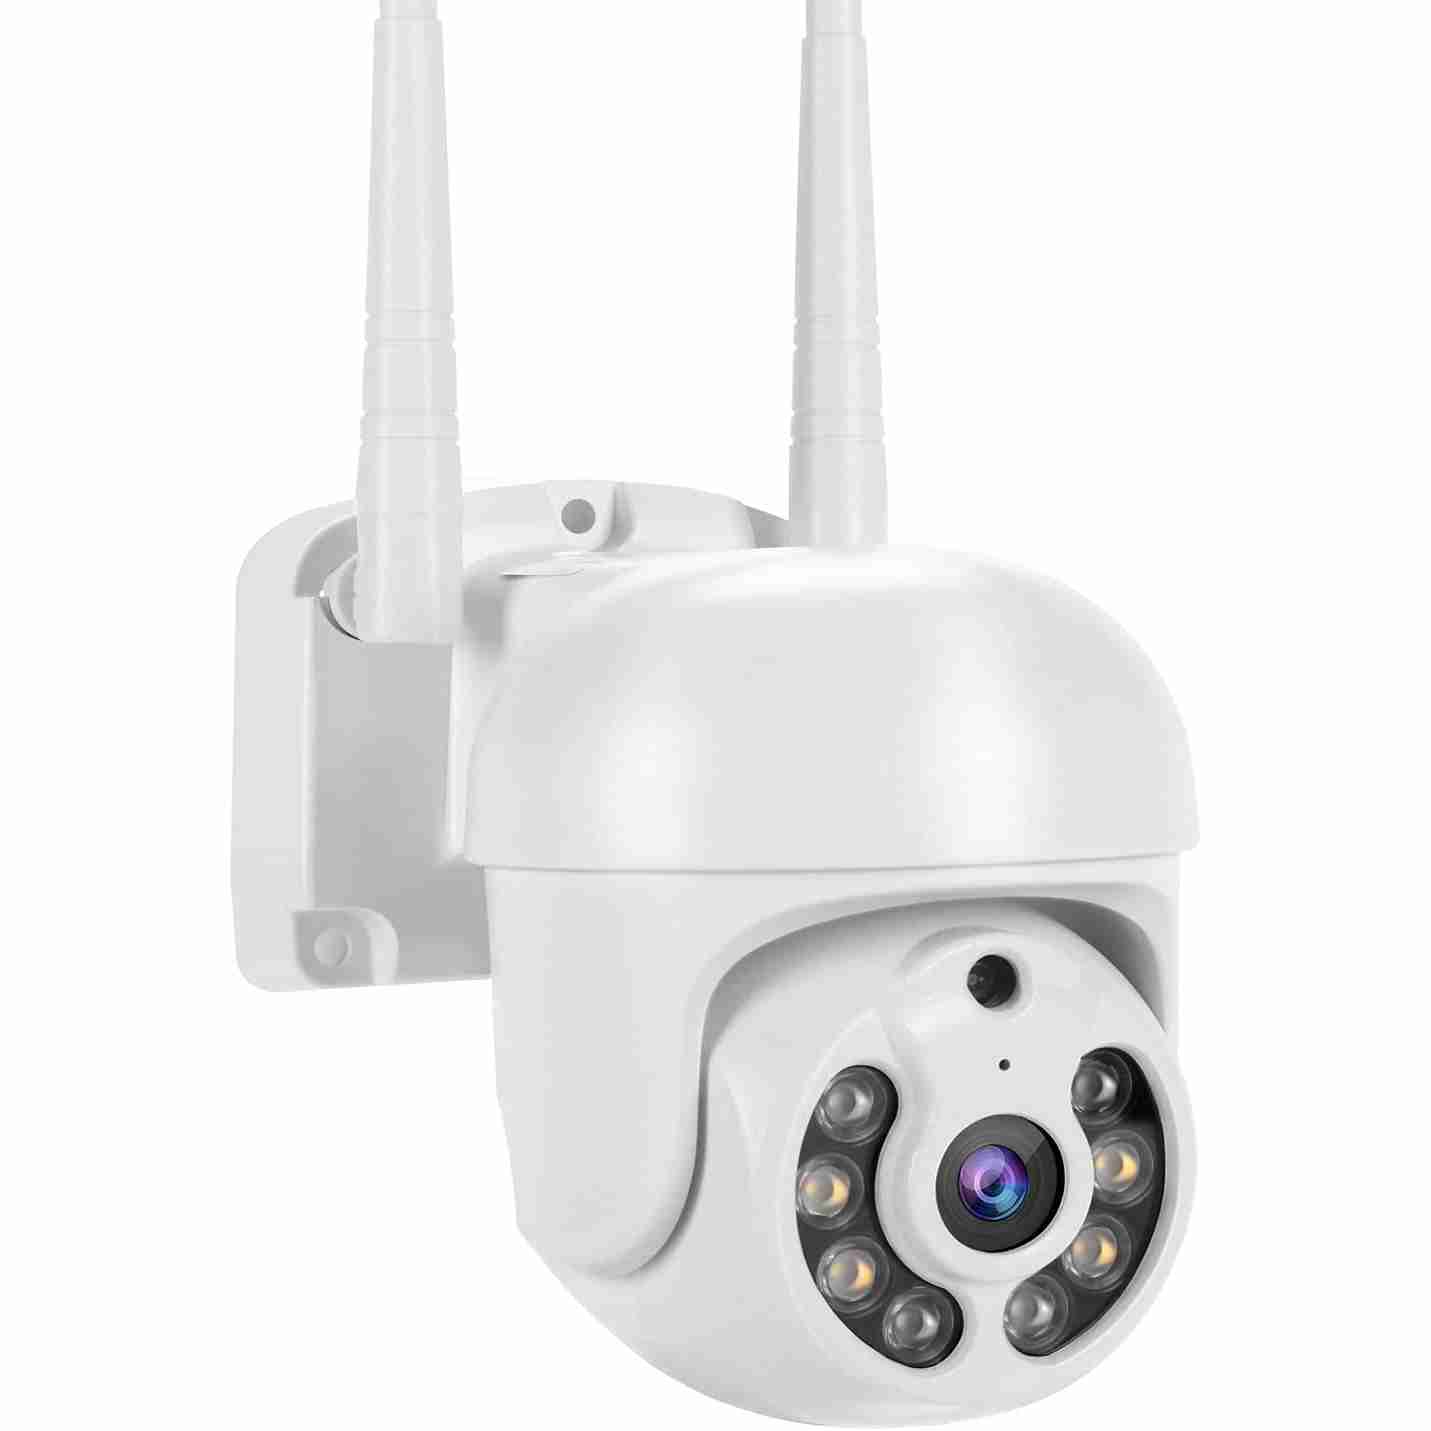 outdoor-pt-wifi-ip-security-camera-3mp with cash back rebate